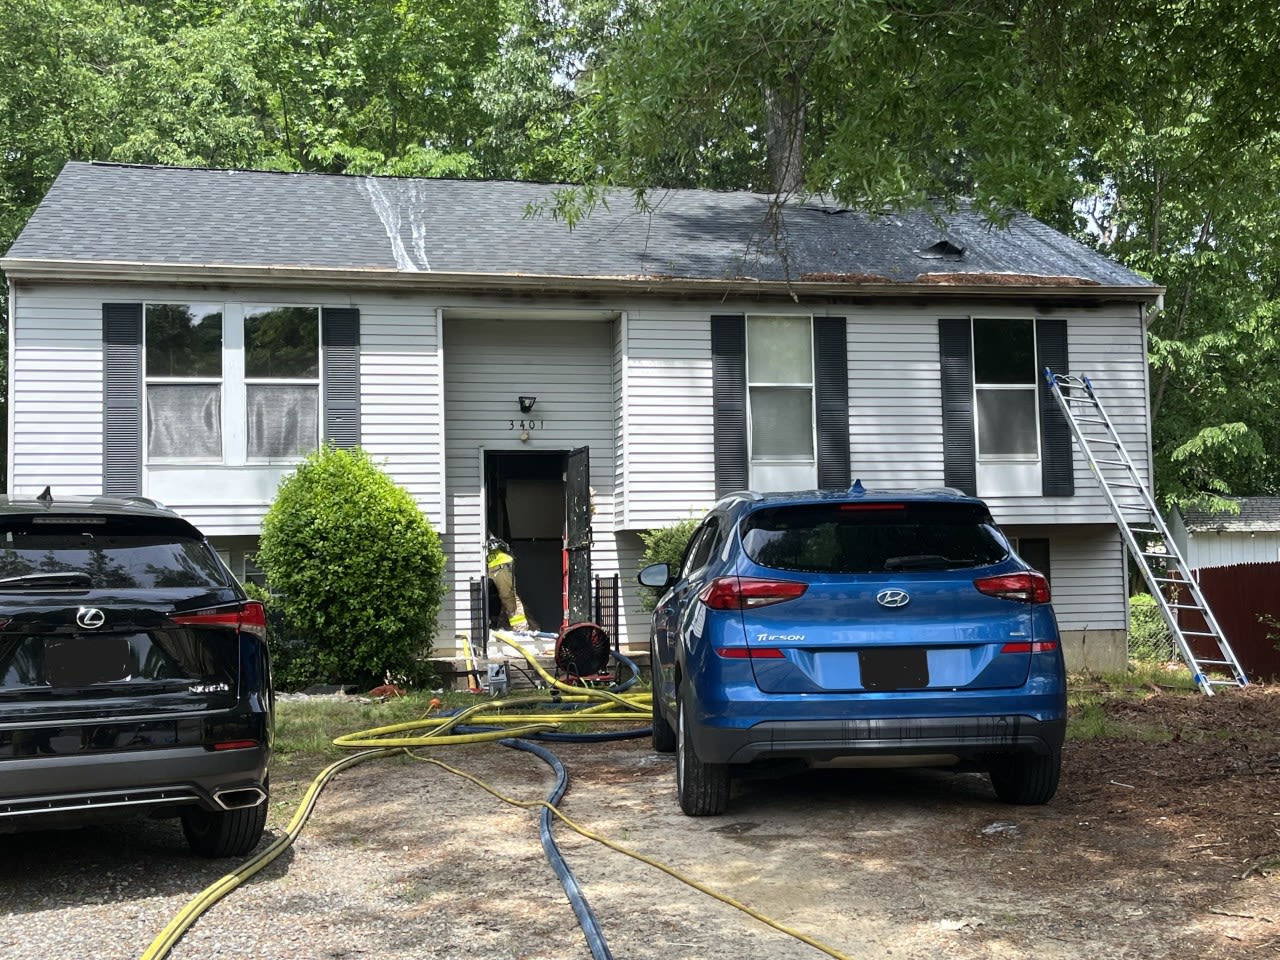 Bedroom of Chesterfield home catches fire